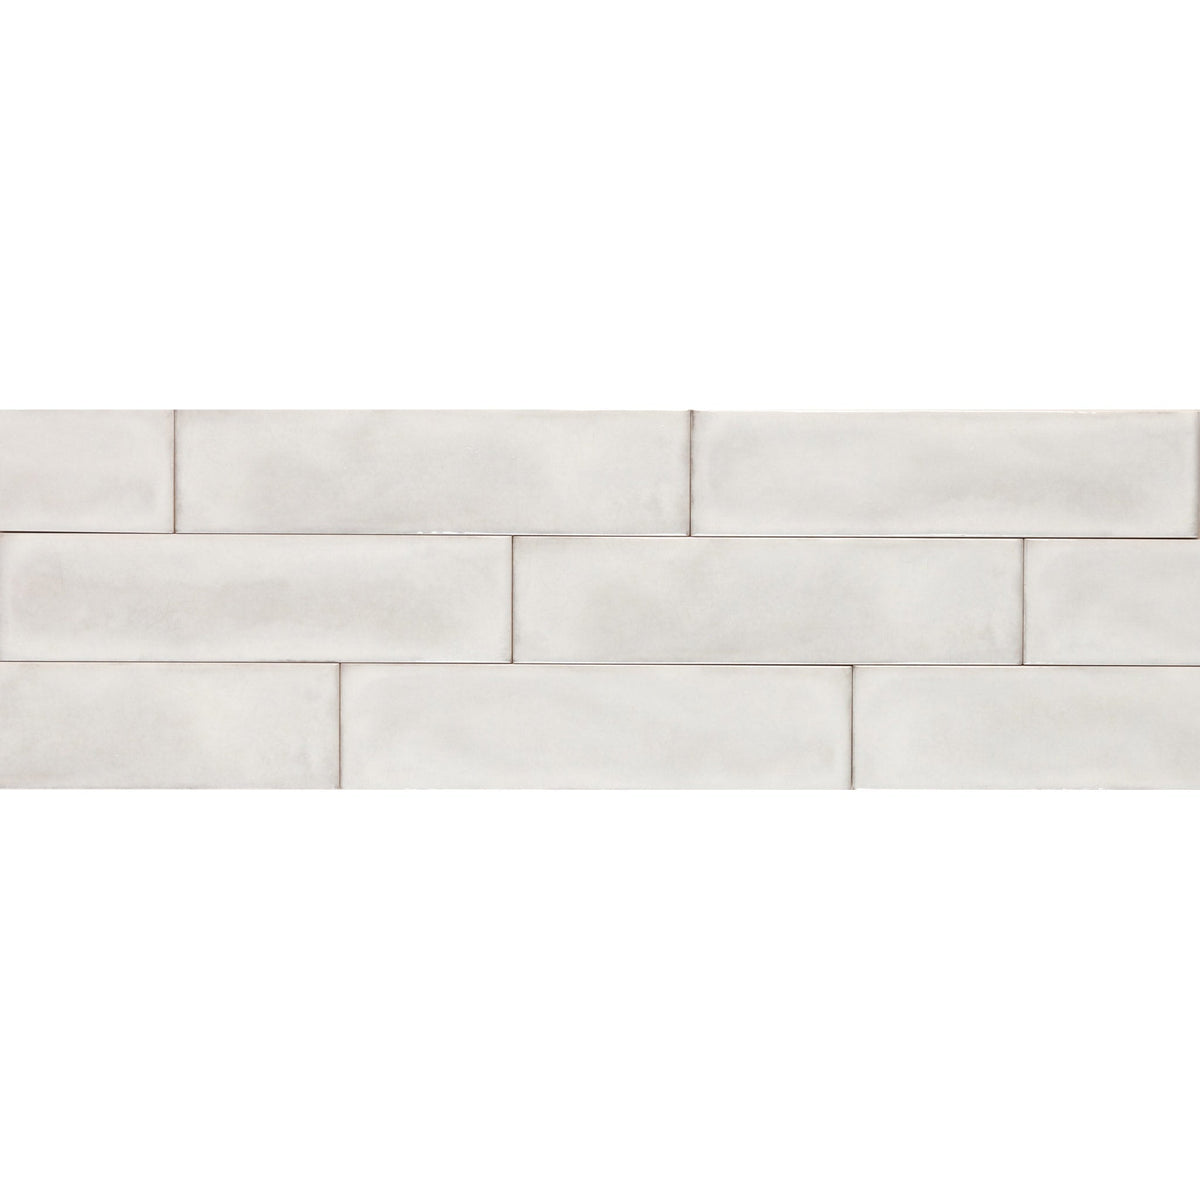 Equipe - Splendours Collection - 3 in. x 12 in. Wall Tile - White